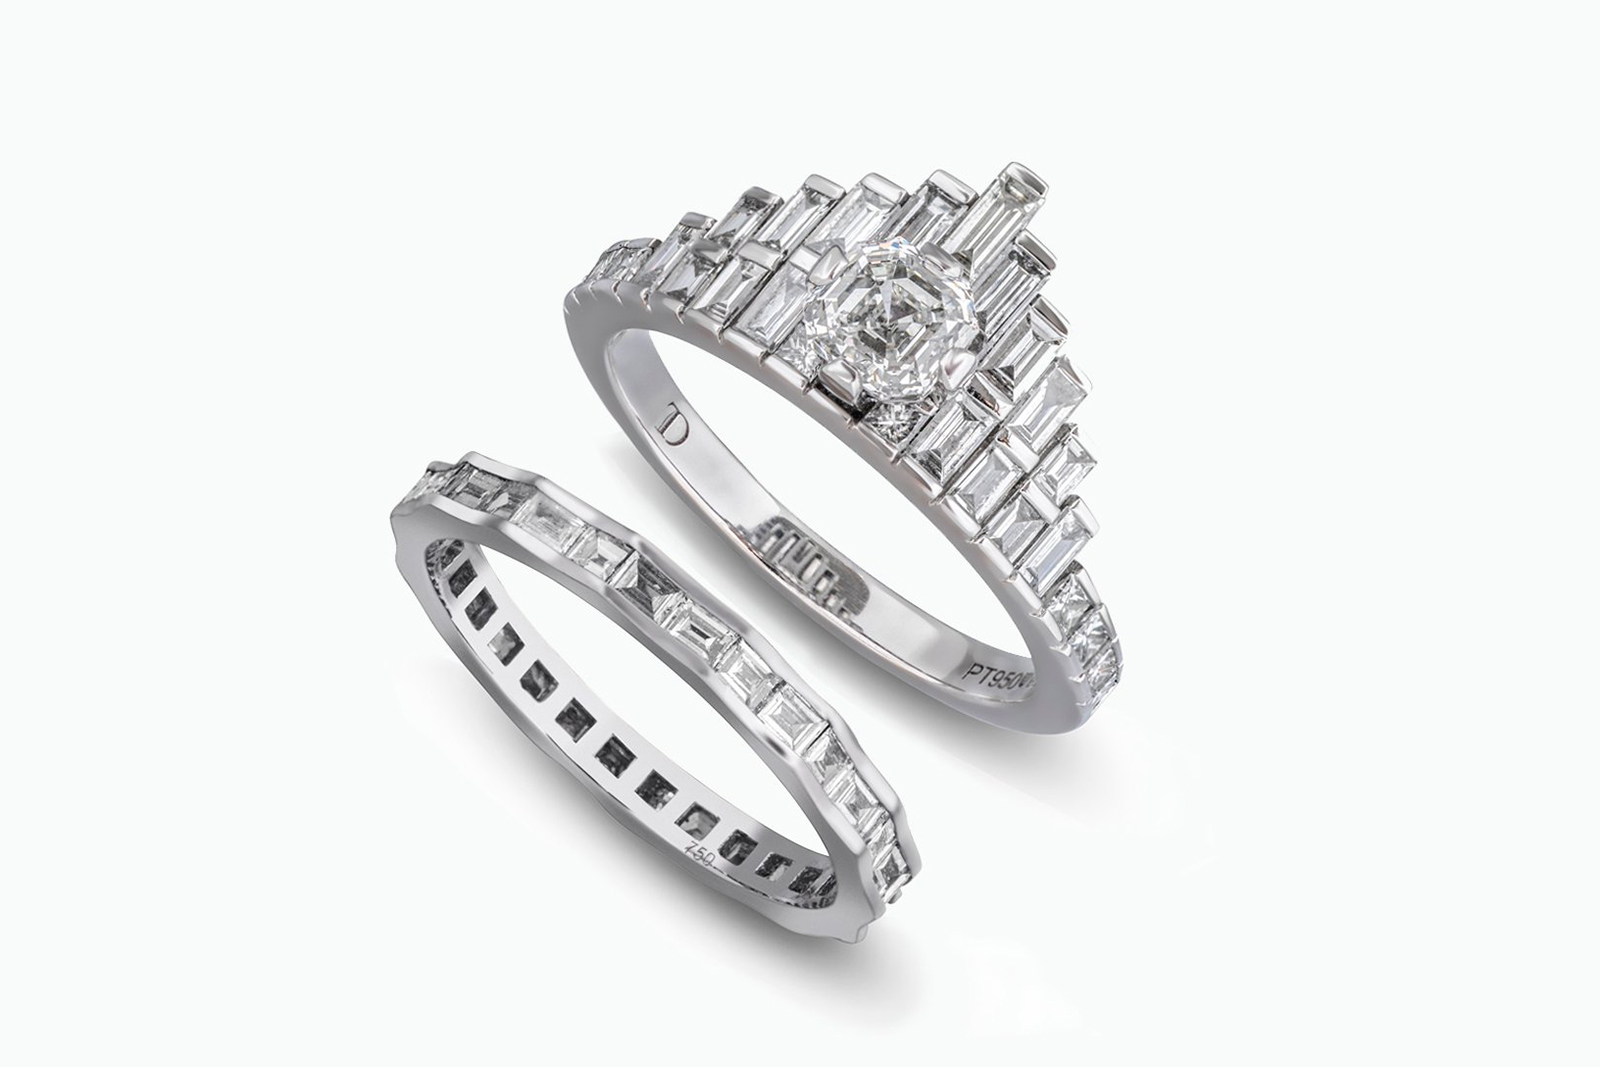 An engagement ring and matching wedding band with baguette-cut diamonds from The Moderne Bridal collection by Tomasz Donocik